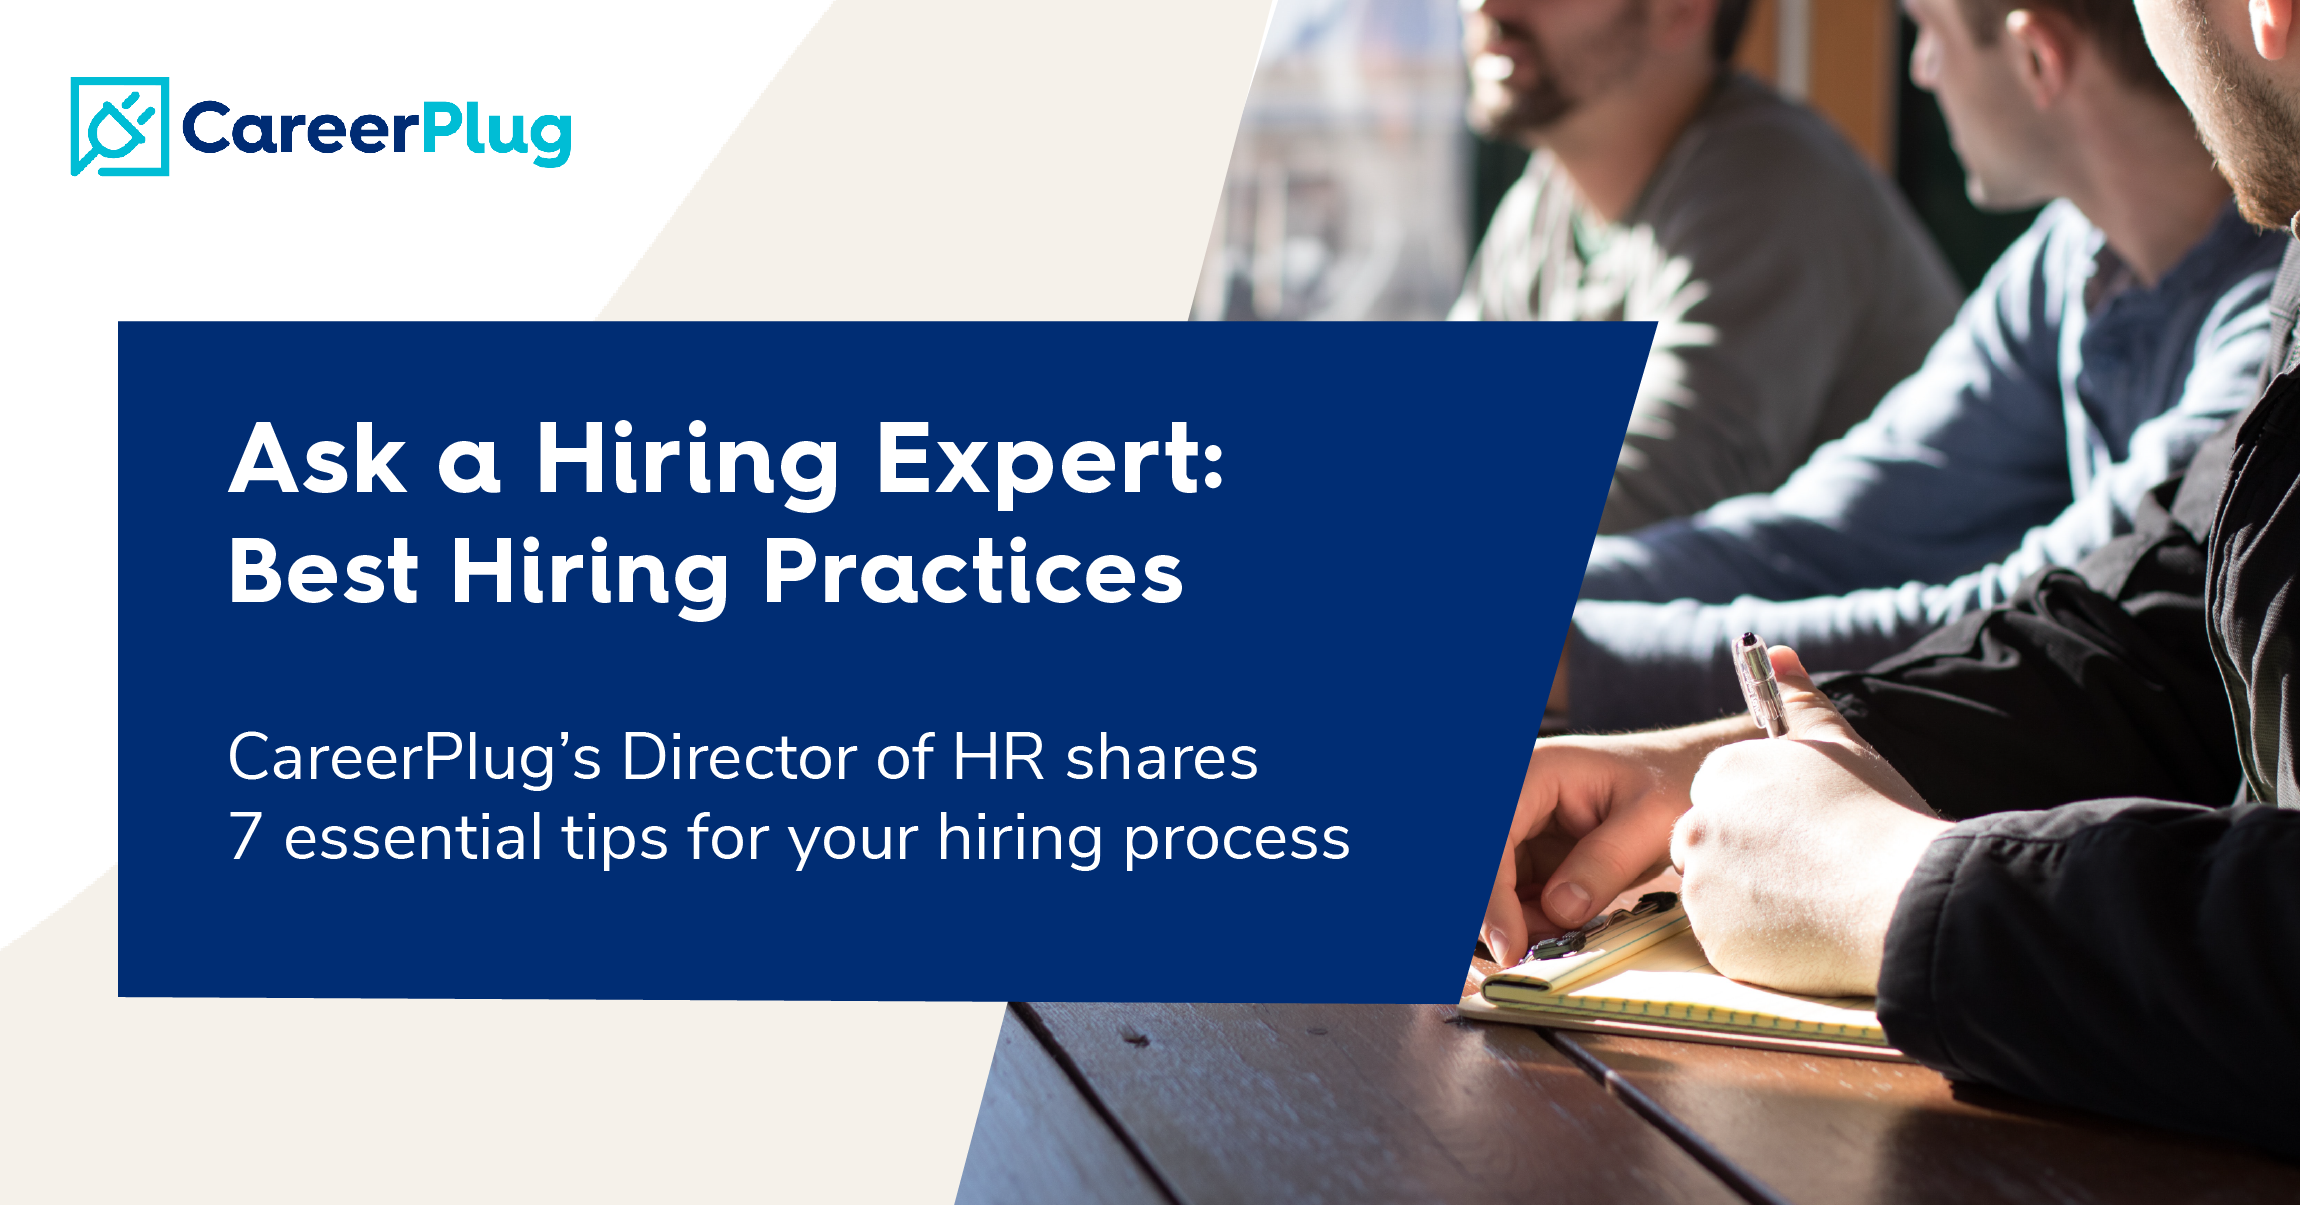 Hiring Best Practices 7 Recruitment Process Tips from CareerPlug's